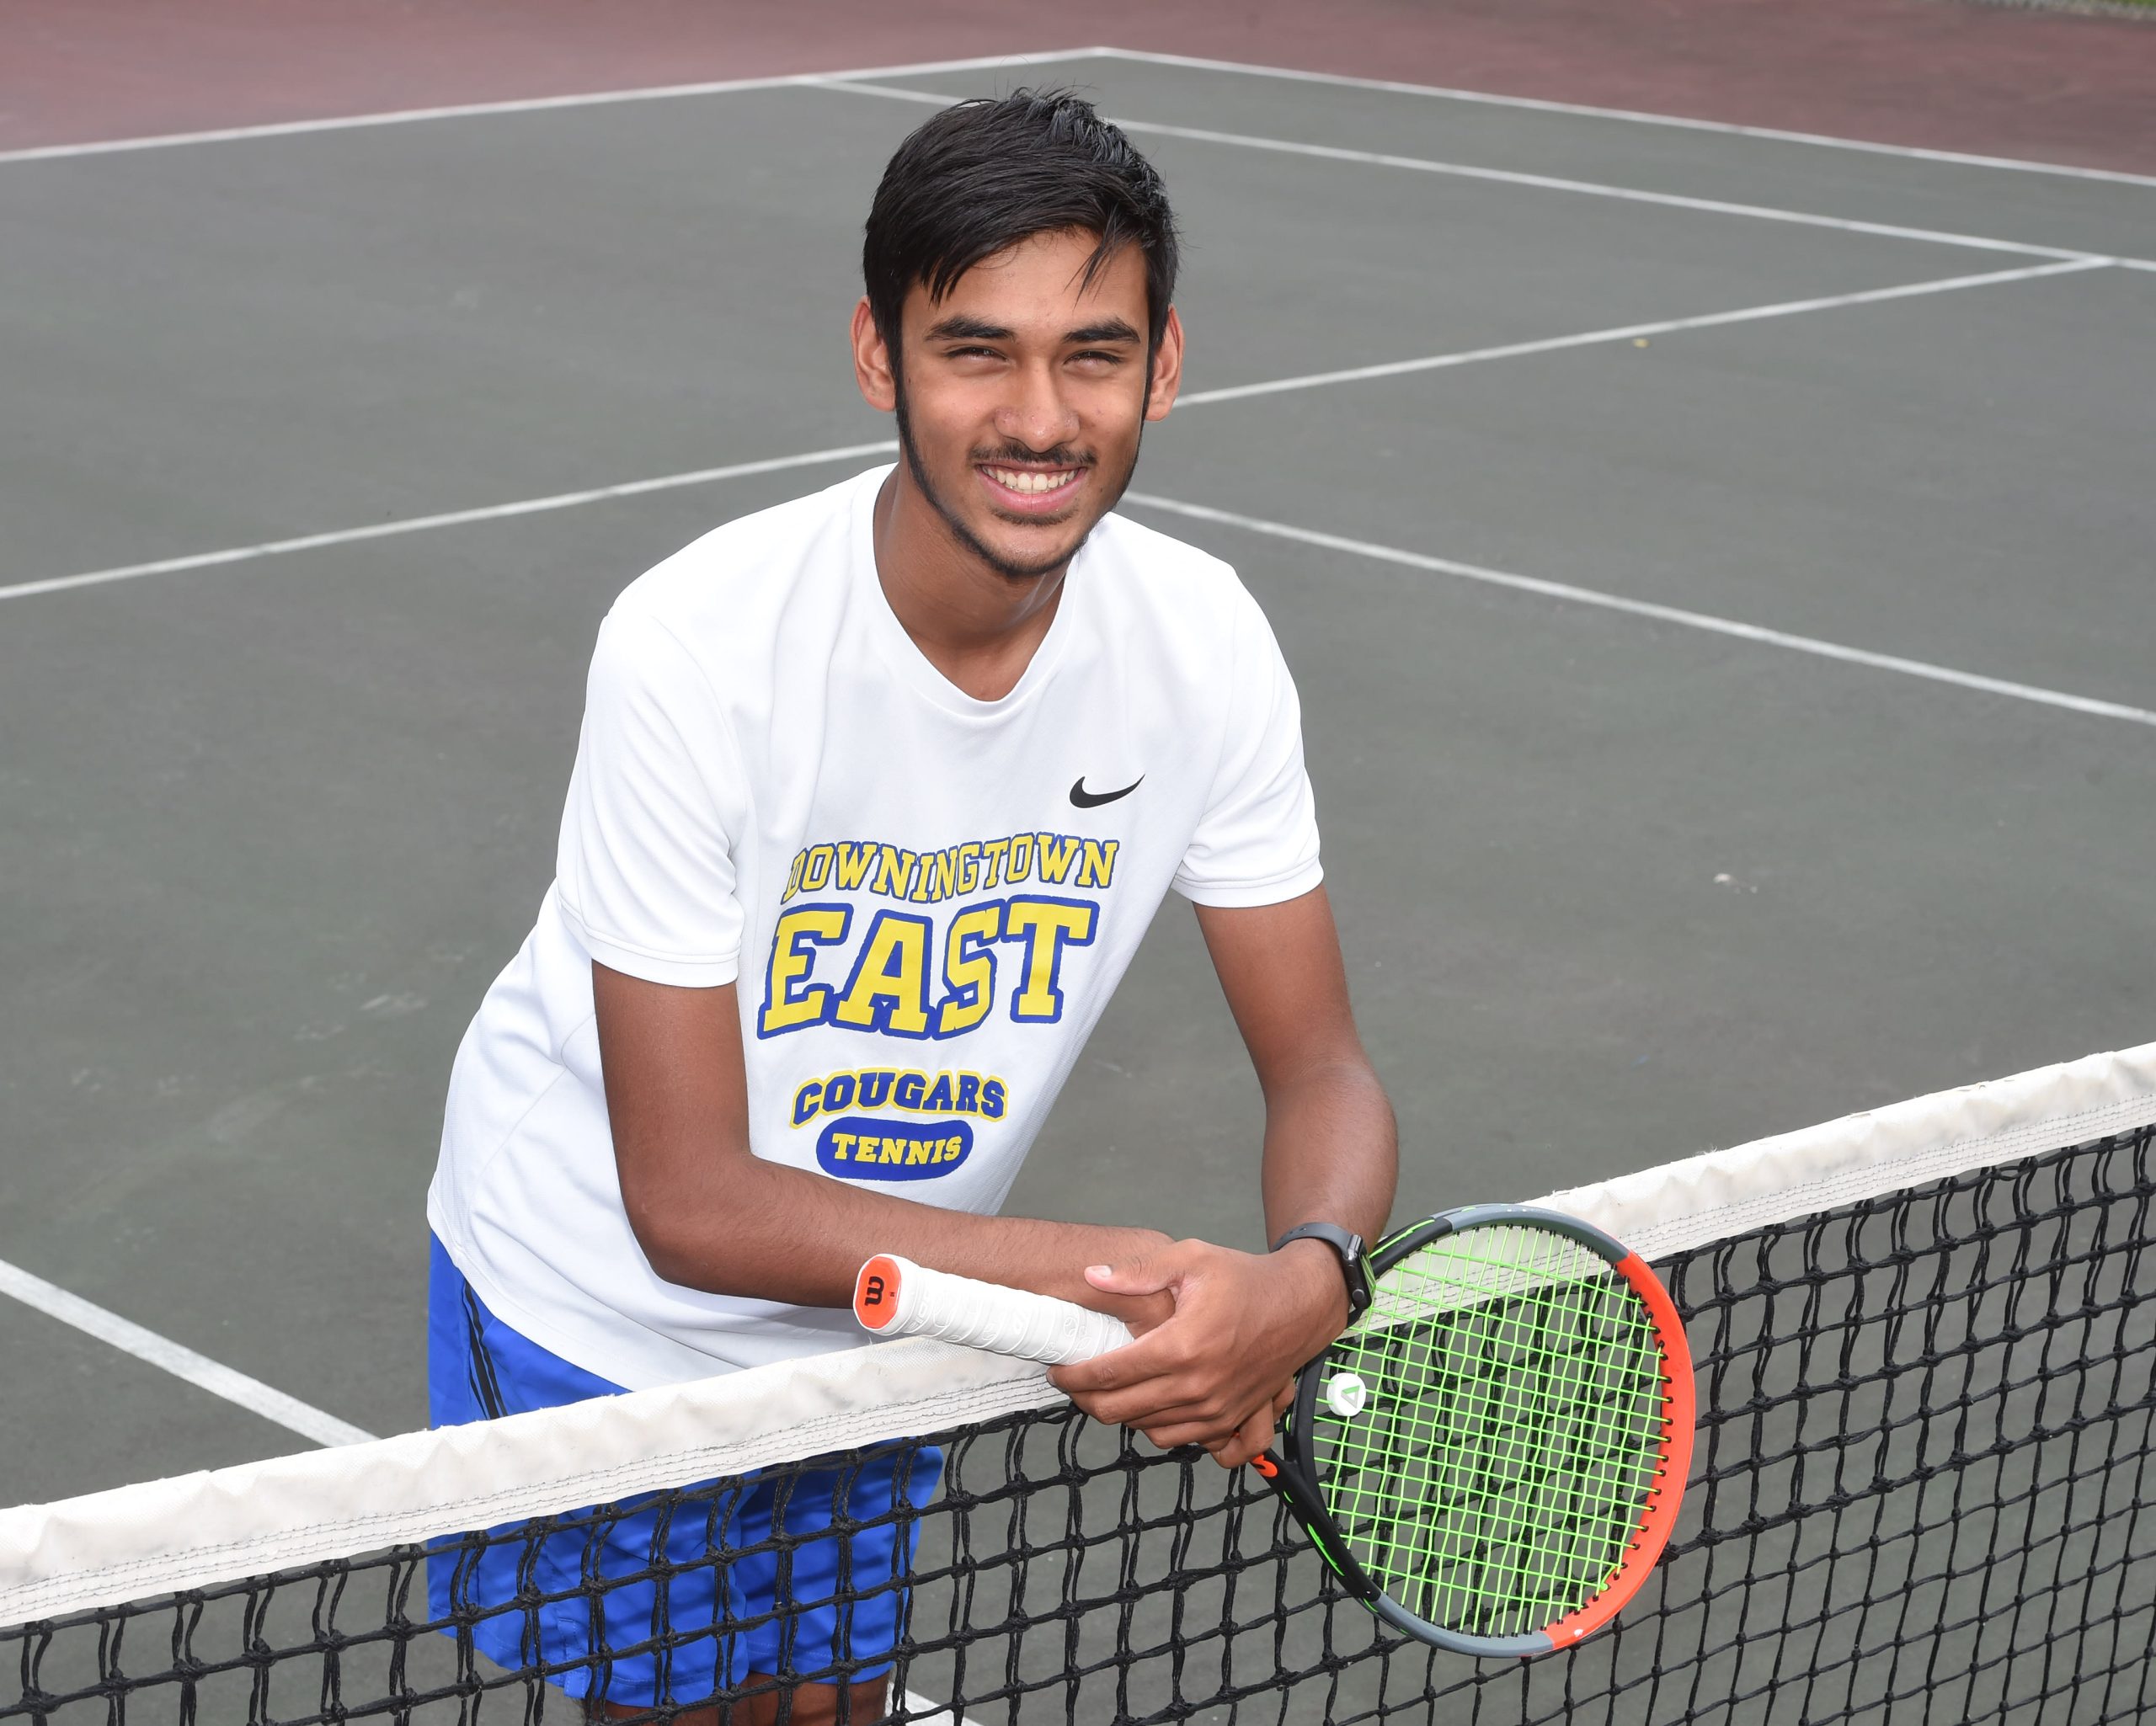 DLN boys tennis previews local squads feature plenty of aces